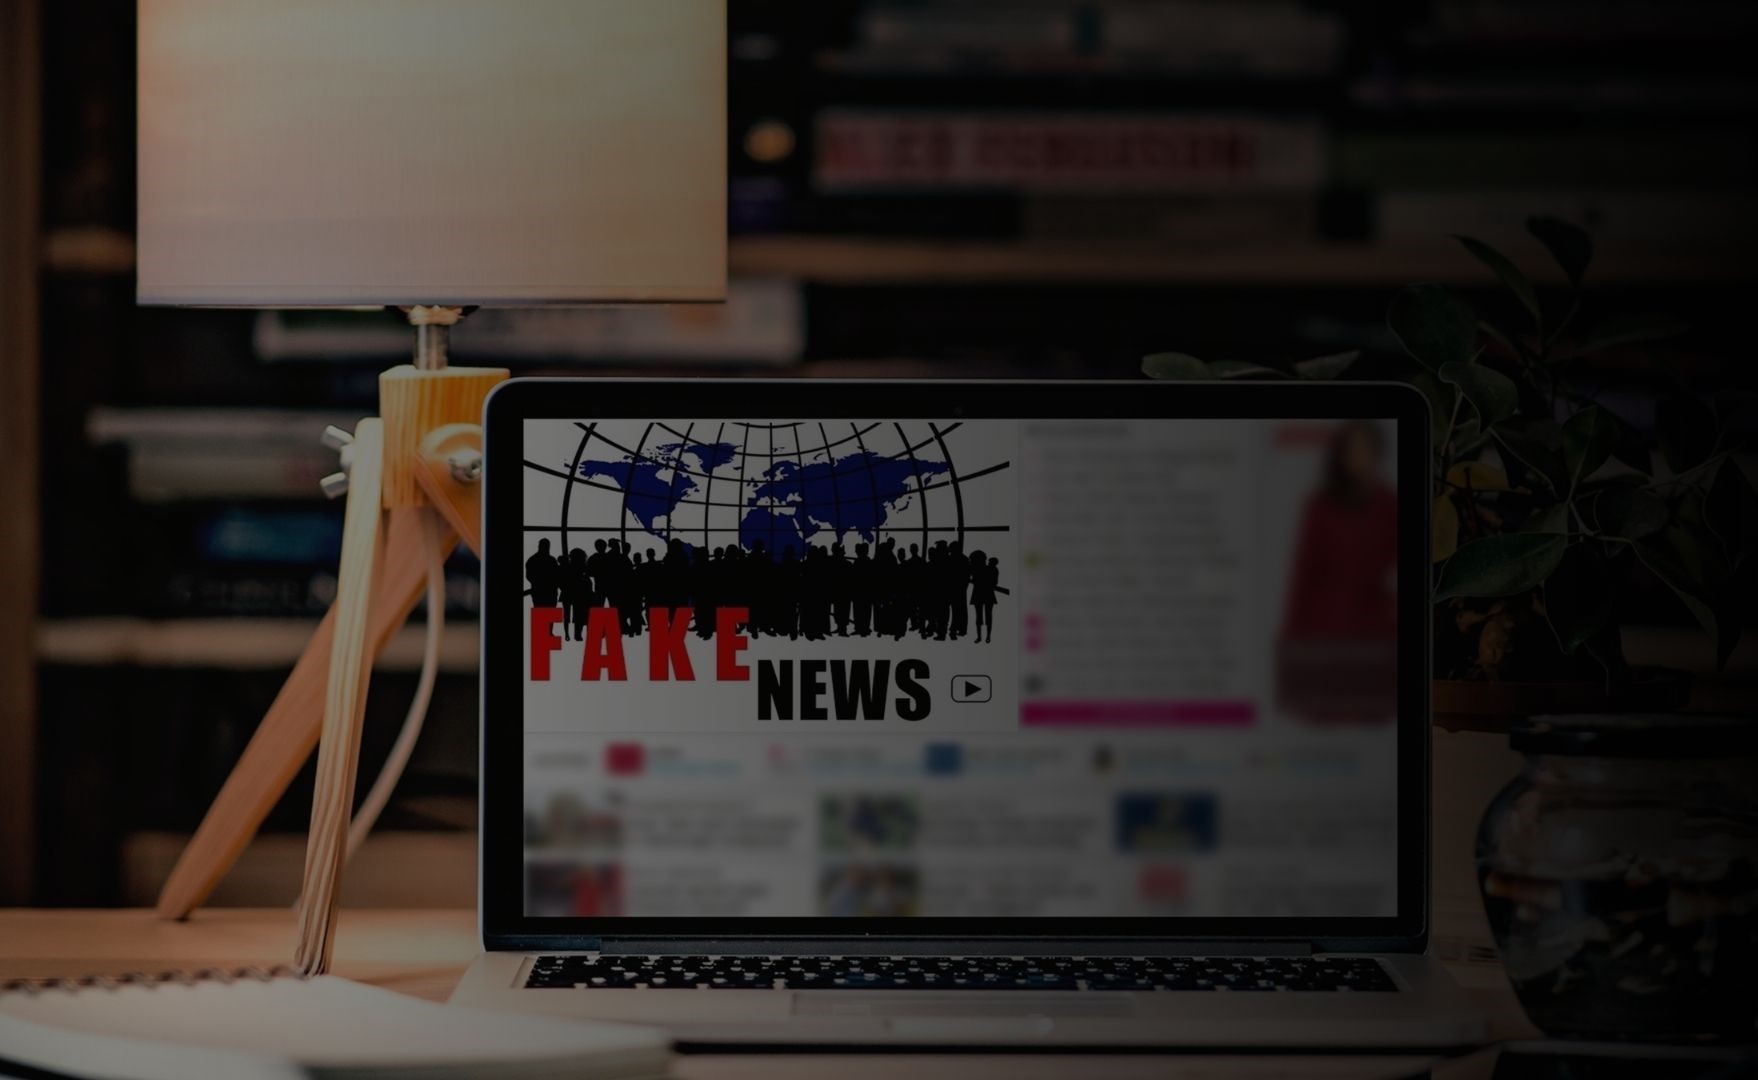 THE WAR ON FAKE NEWS AND DISINFORMATION